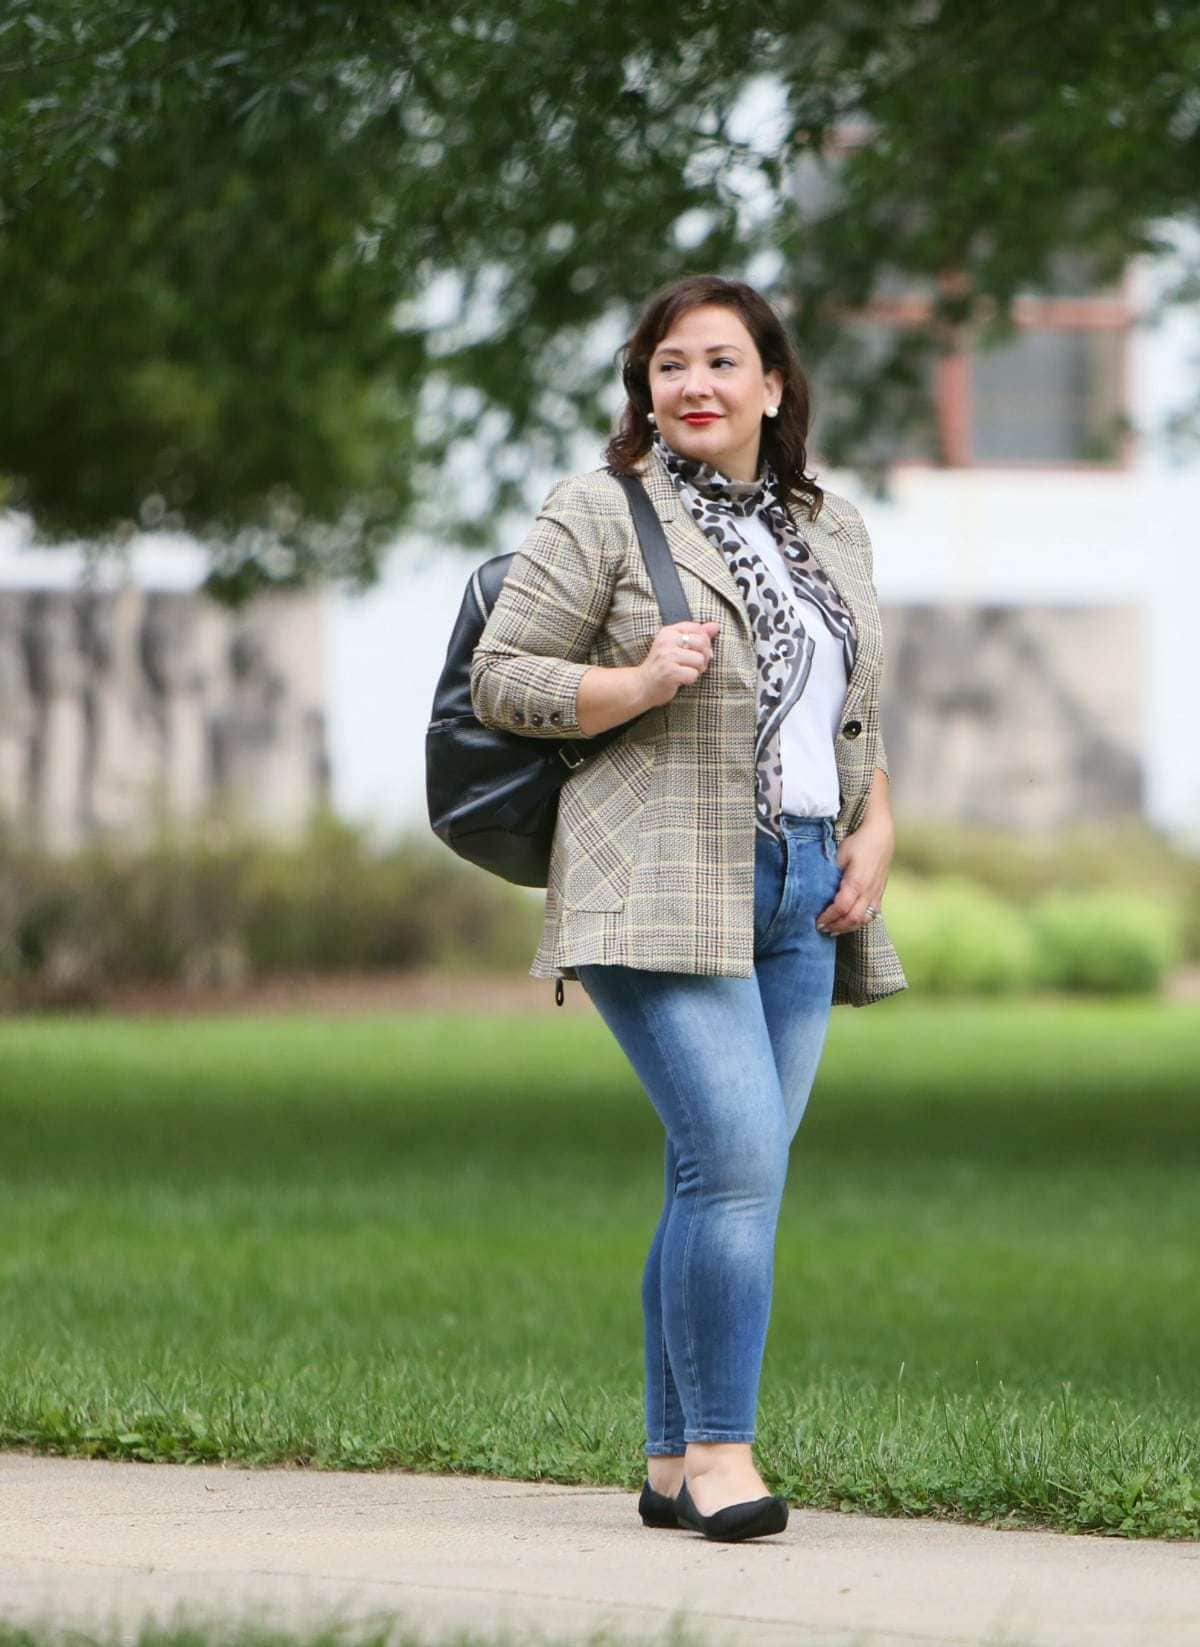 Wardrobe Oxygen in the cabi Pastime jacket and leopard scarf styled with a Universal Standard t-shirt, Banana Republic jeans, Rothy's flats, and the ECCO SP3 backpack for fall